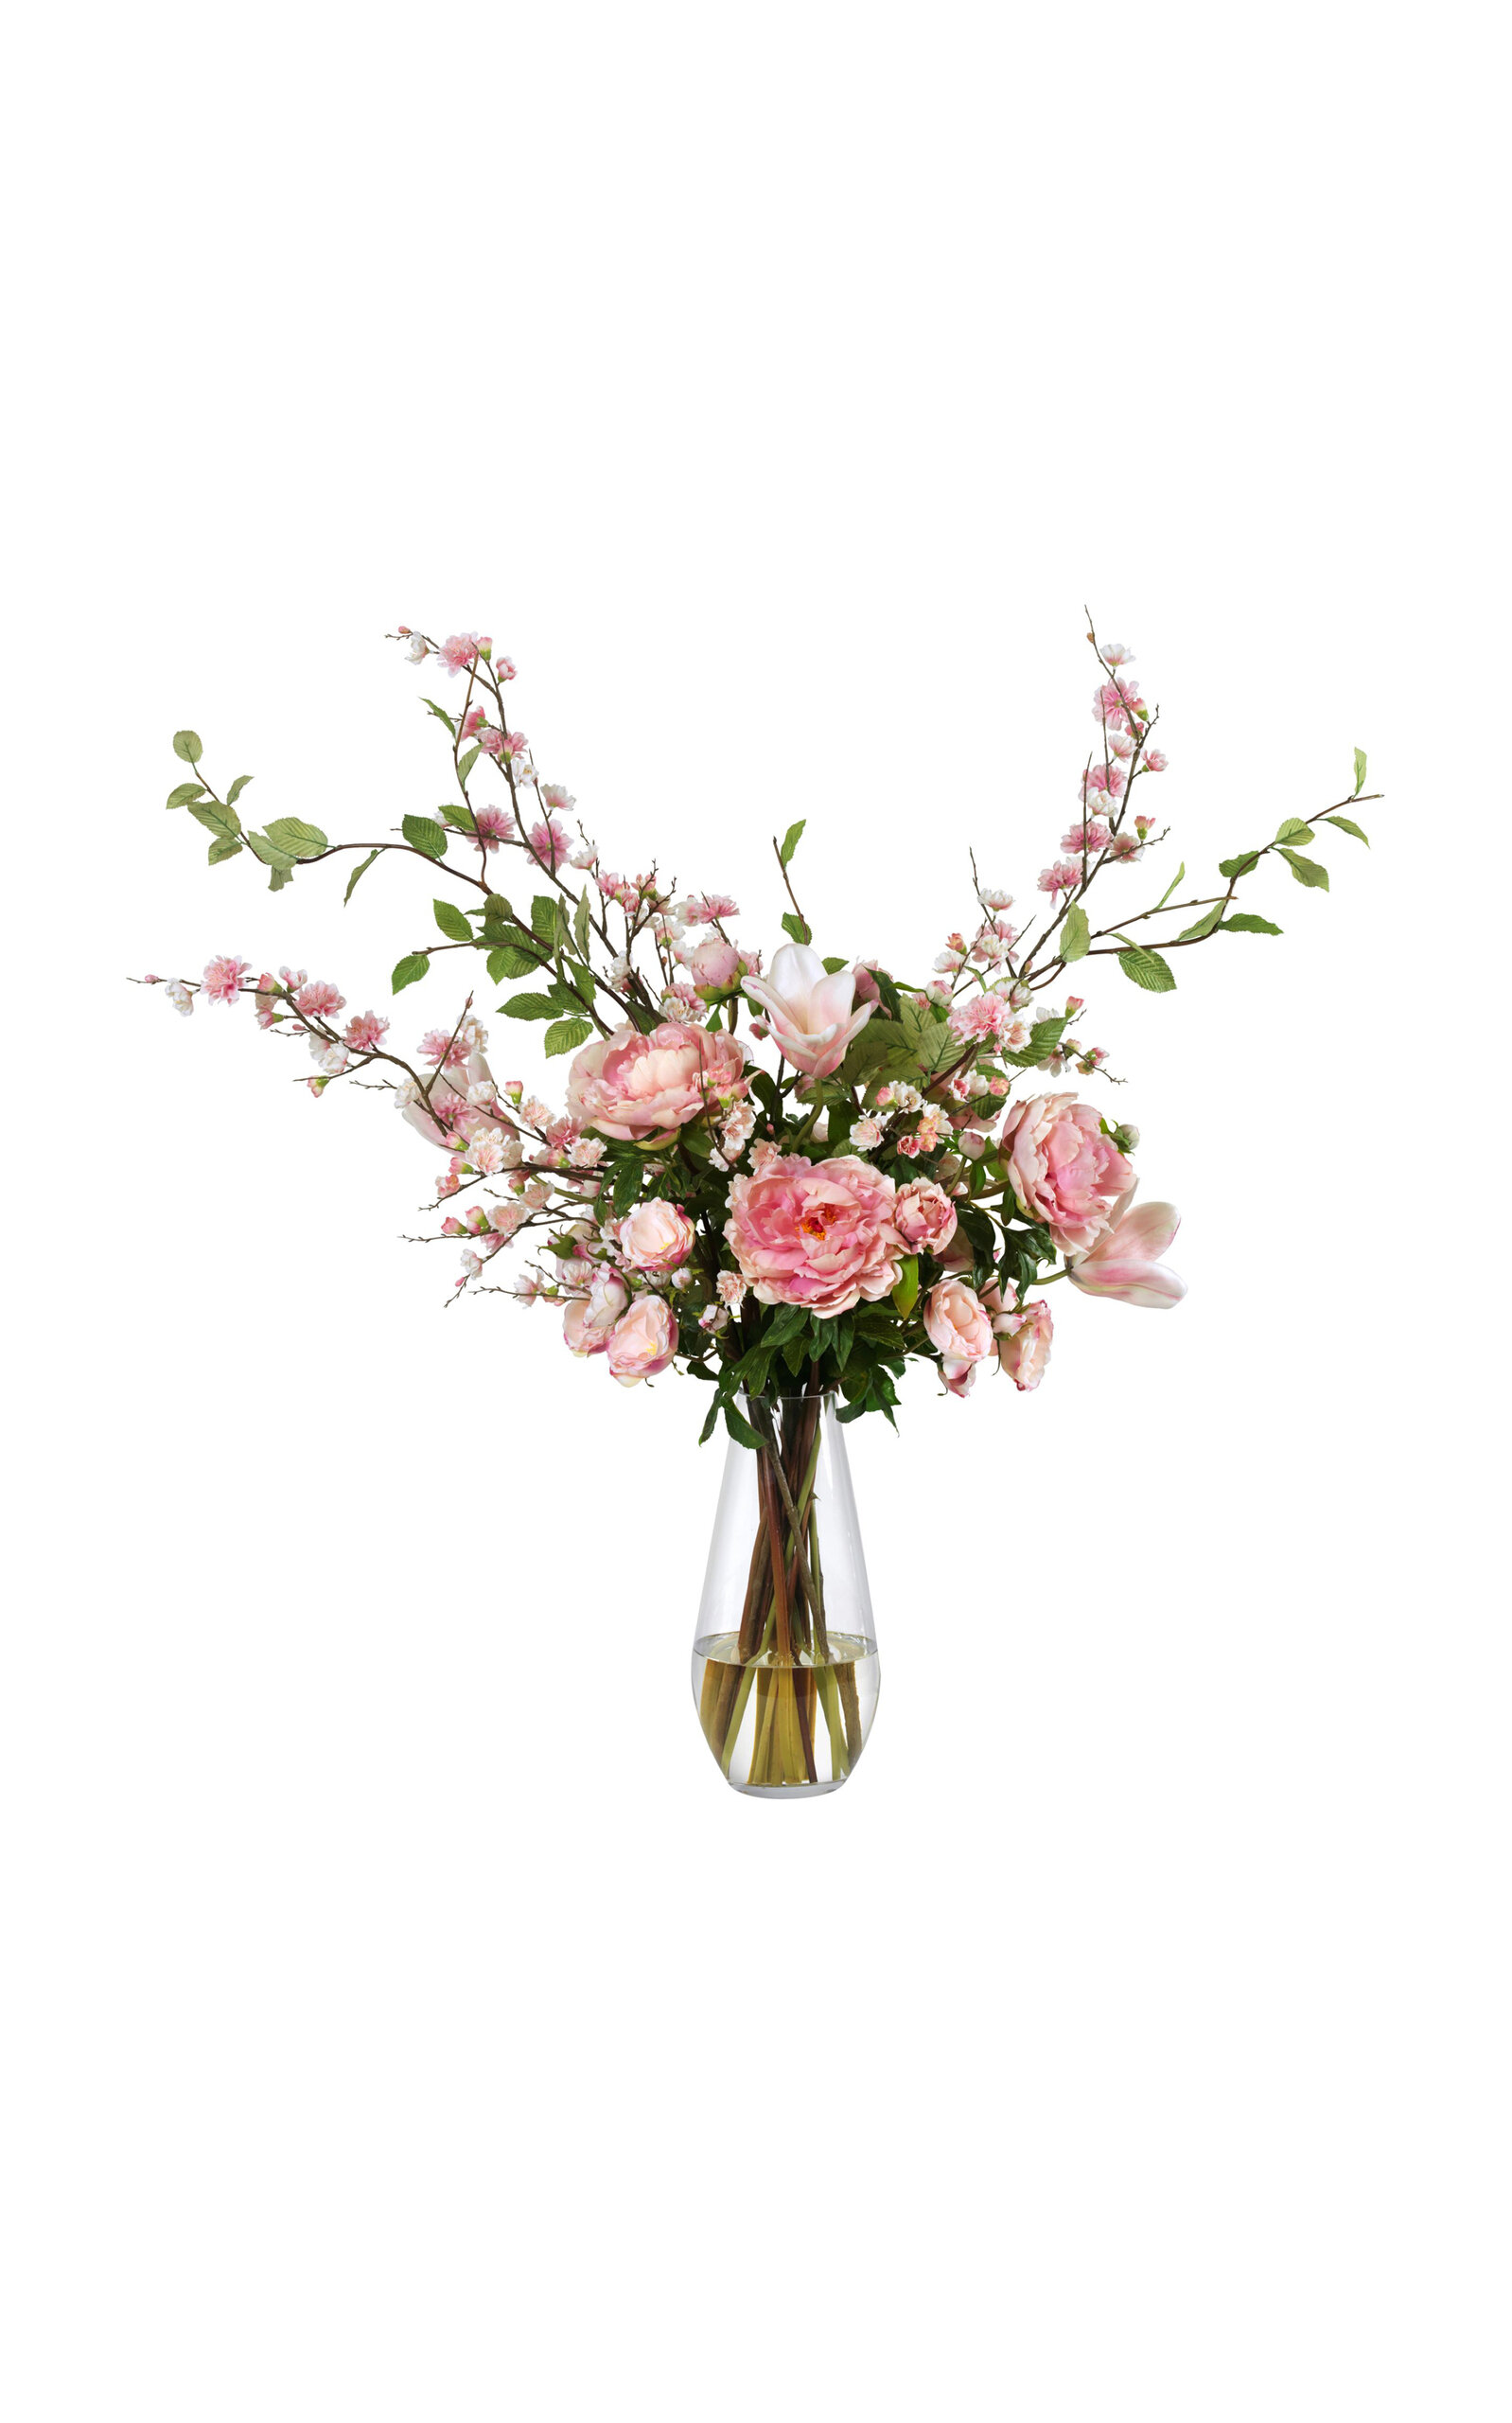 Diane James Designs Pink Blossoms; Tulips And Roses In Teardrop Vase In Multi